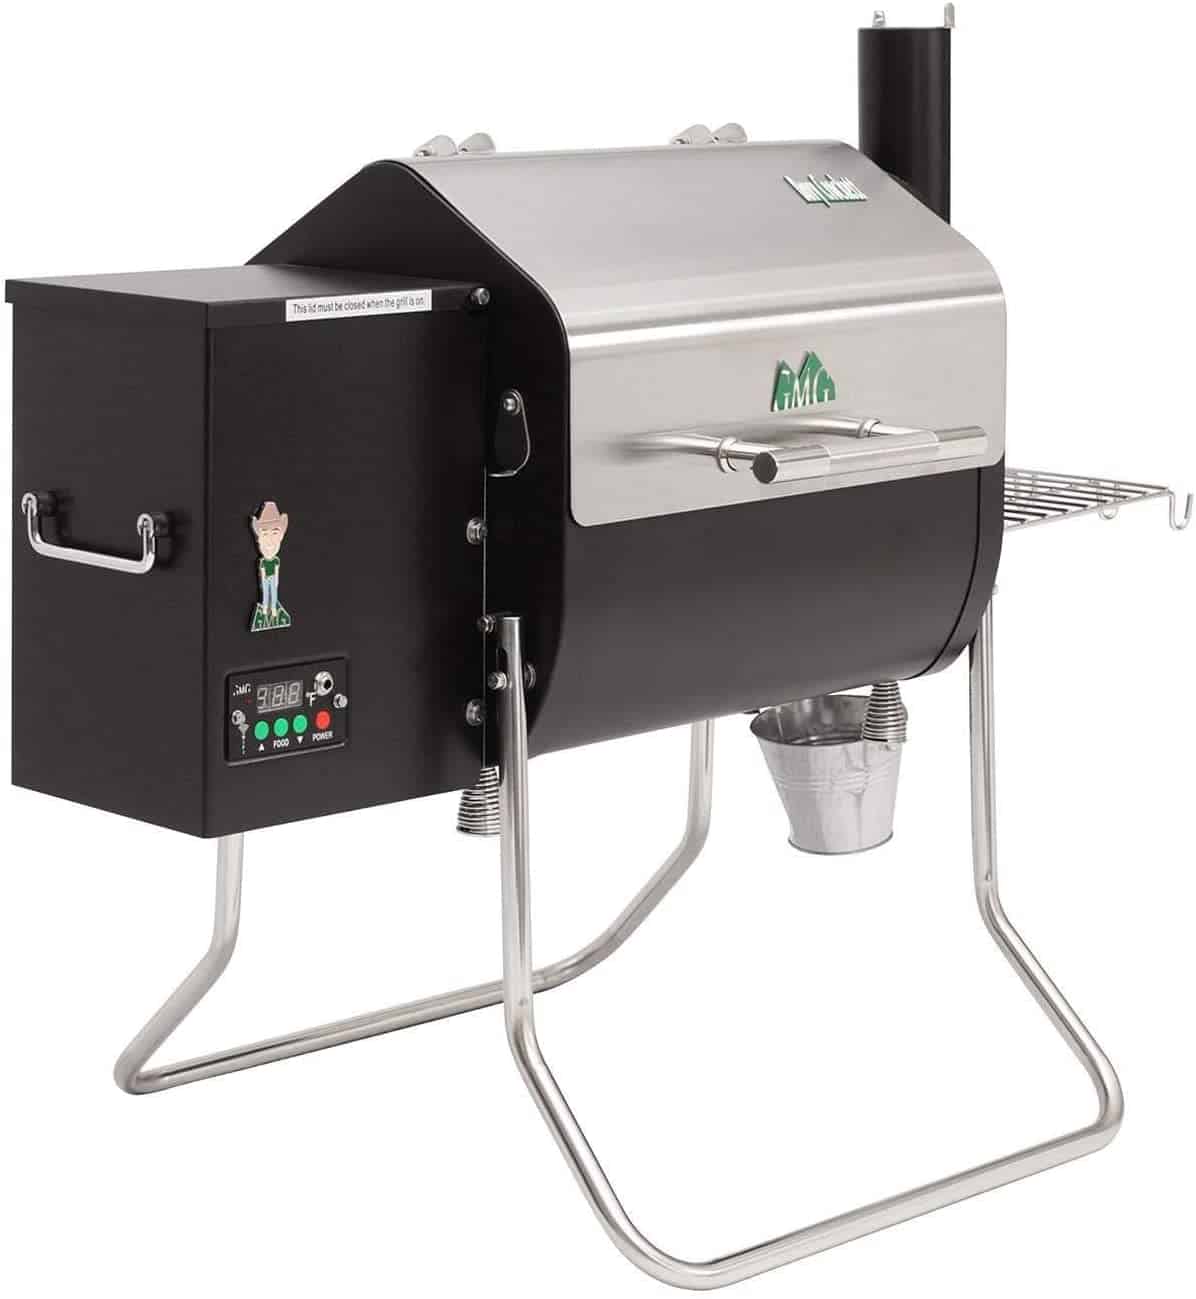 Best small pellet grill for smoking and grilling- GMG Davy Crockett